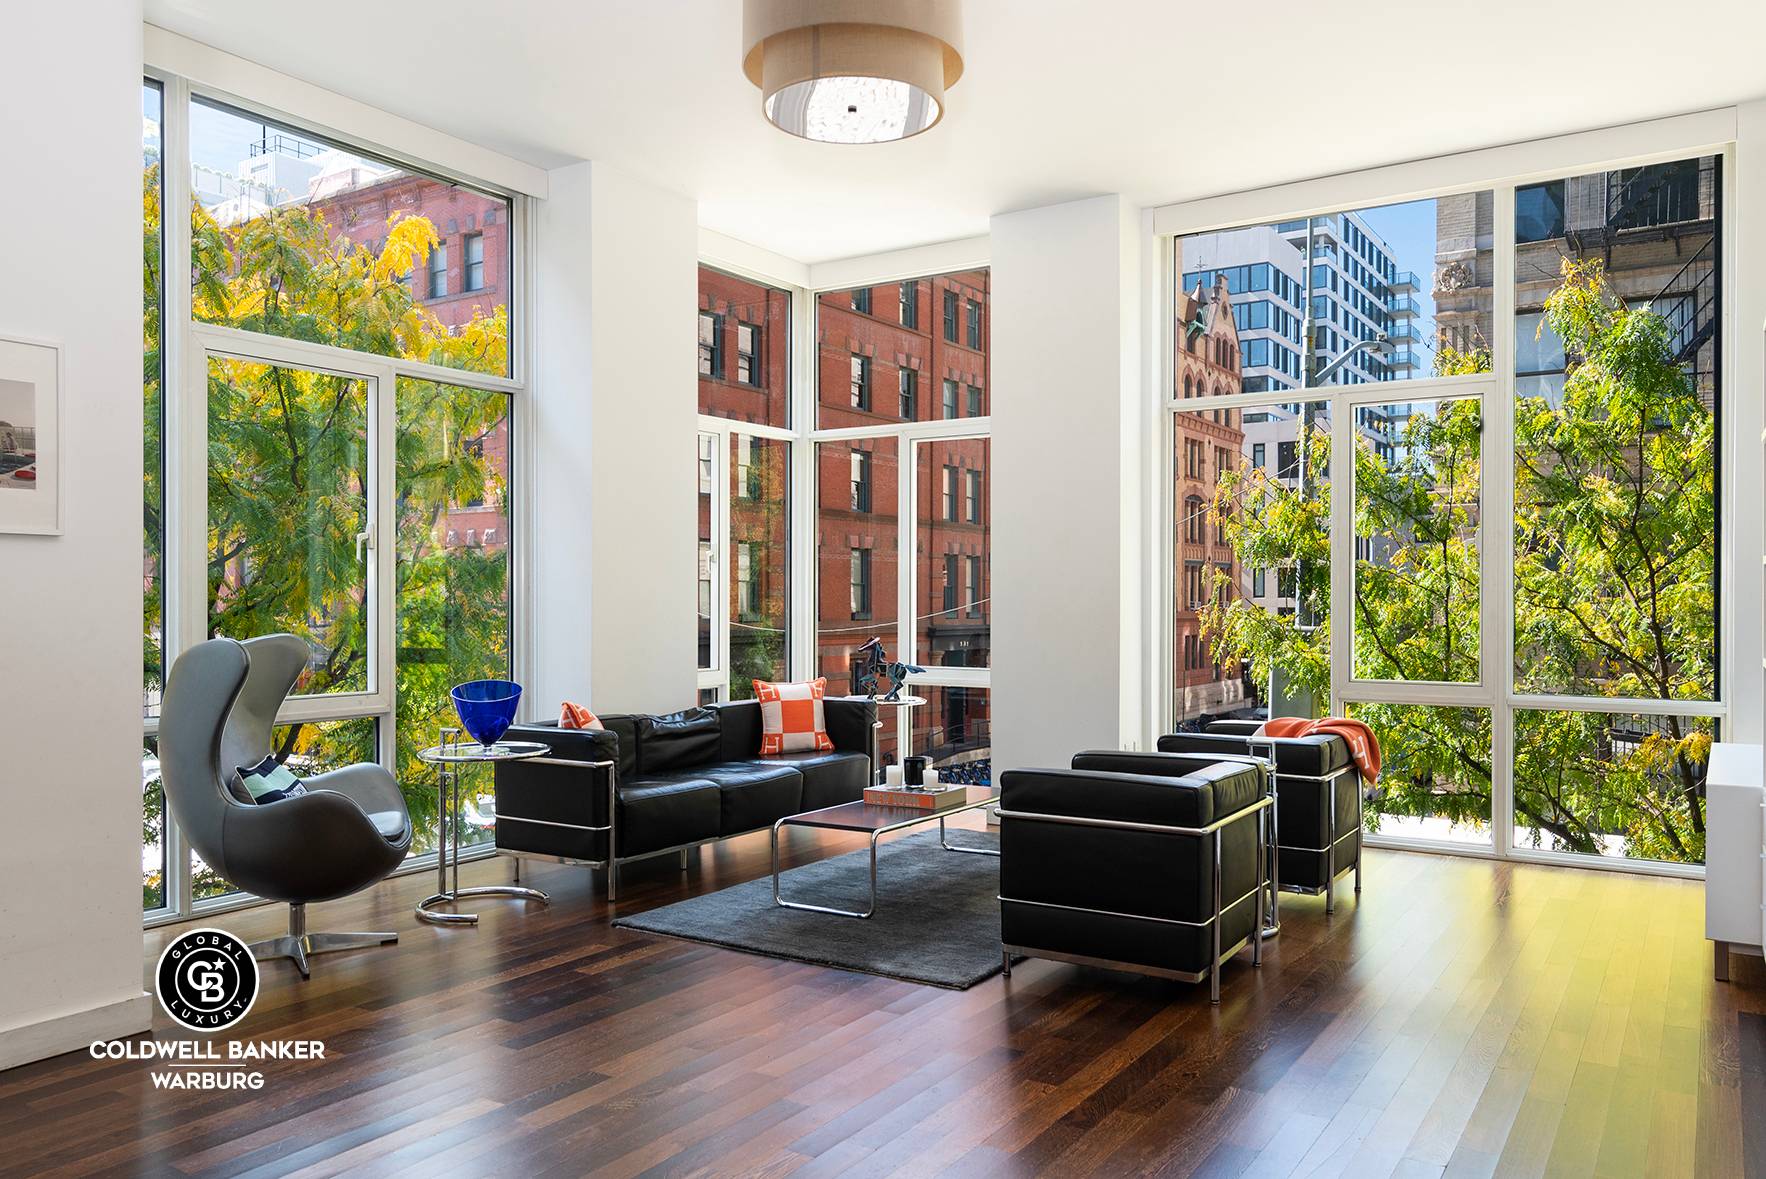 NORTH TRIBECA 3 Bed 3 Bath FLOODED WITH LIGHT 11 CEILINGS AND COBBLESTONE STREETS With 1862 square feet of space, southern and western exposures, and 11 foot floor to ceiling ...